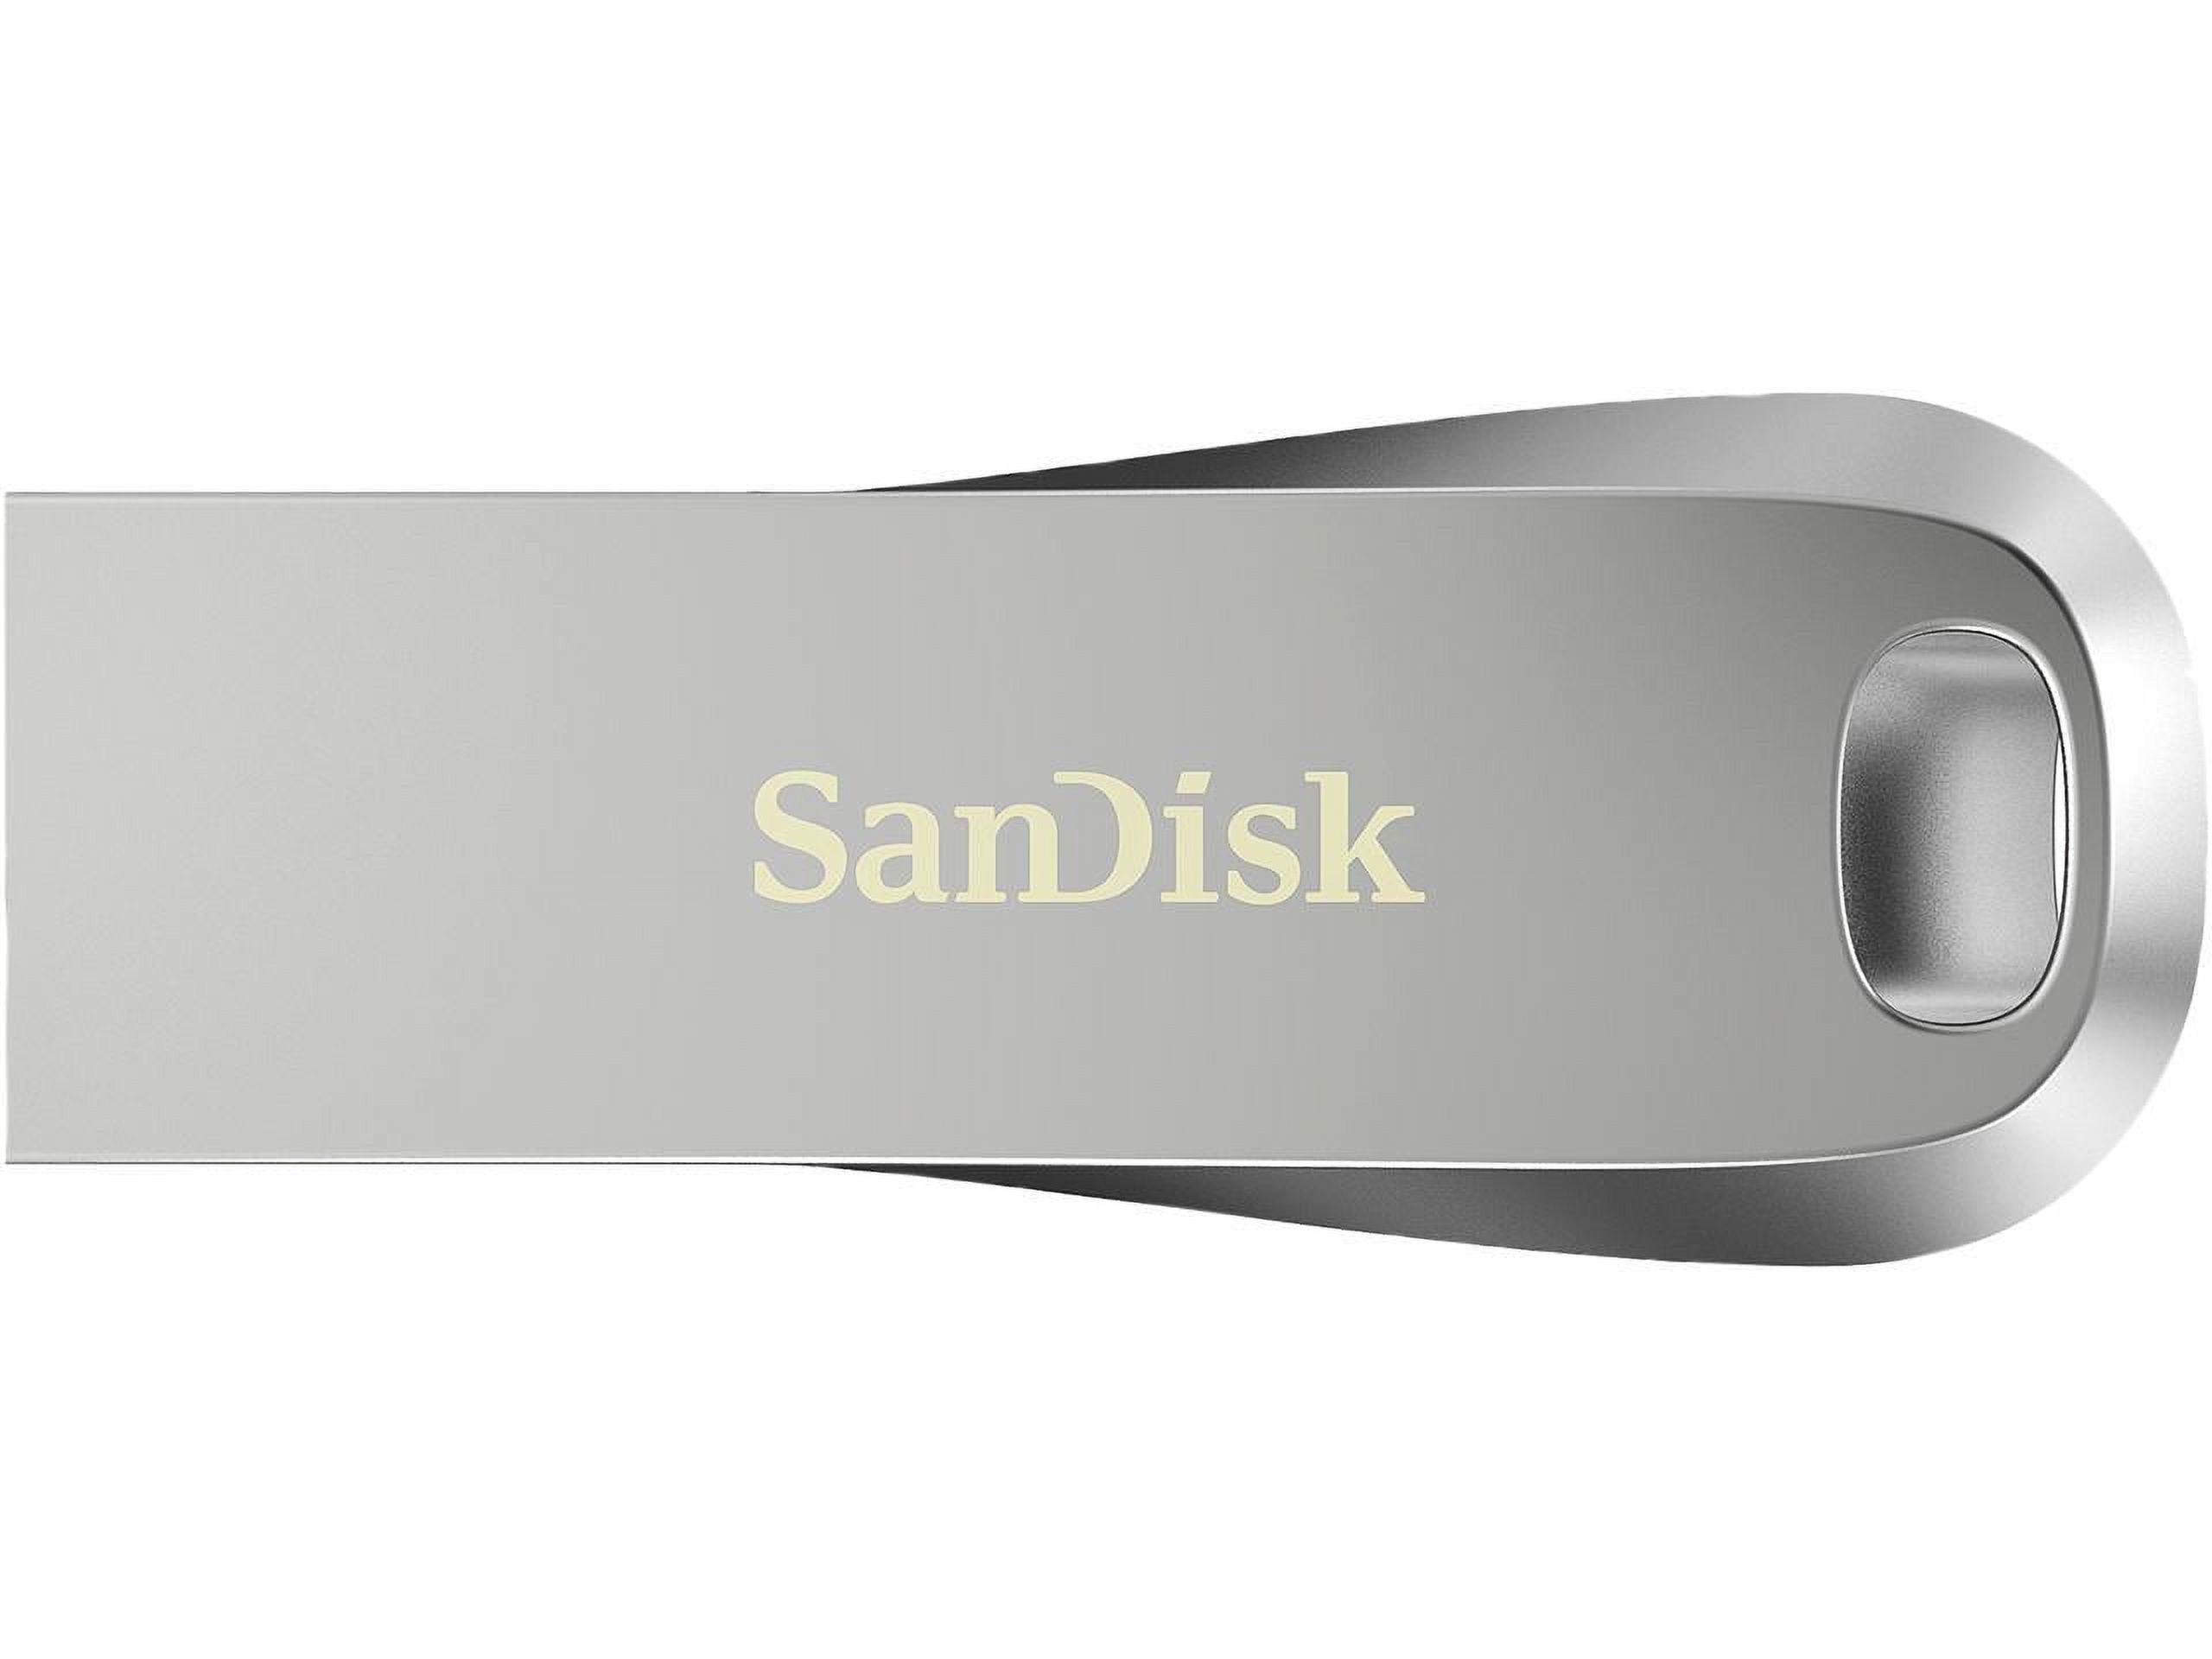 SanDisk 64GB Ultra Luxe USB 3.1 Flash Drive, Speed Up to 150MB/s (SDCZ74-064G-G46) - image 1 of 5